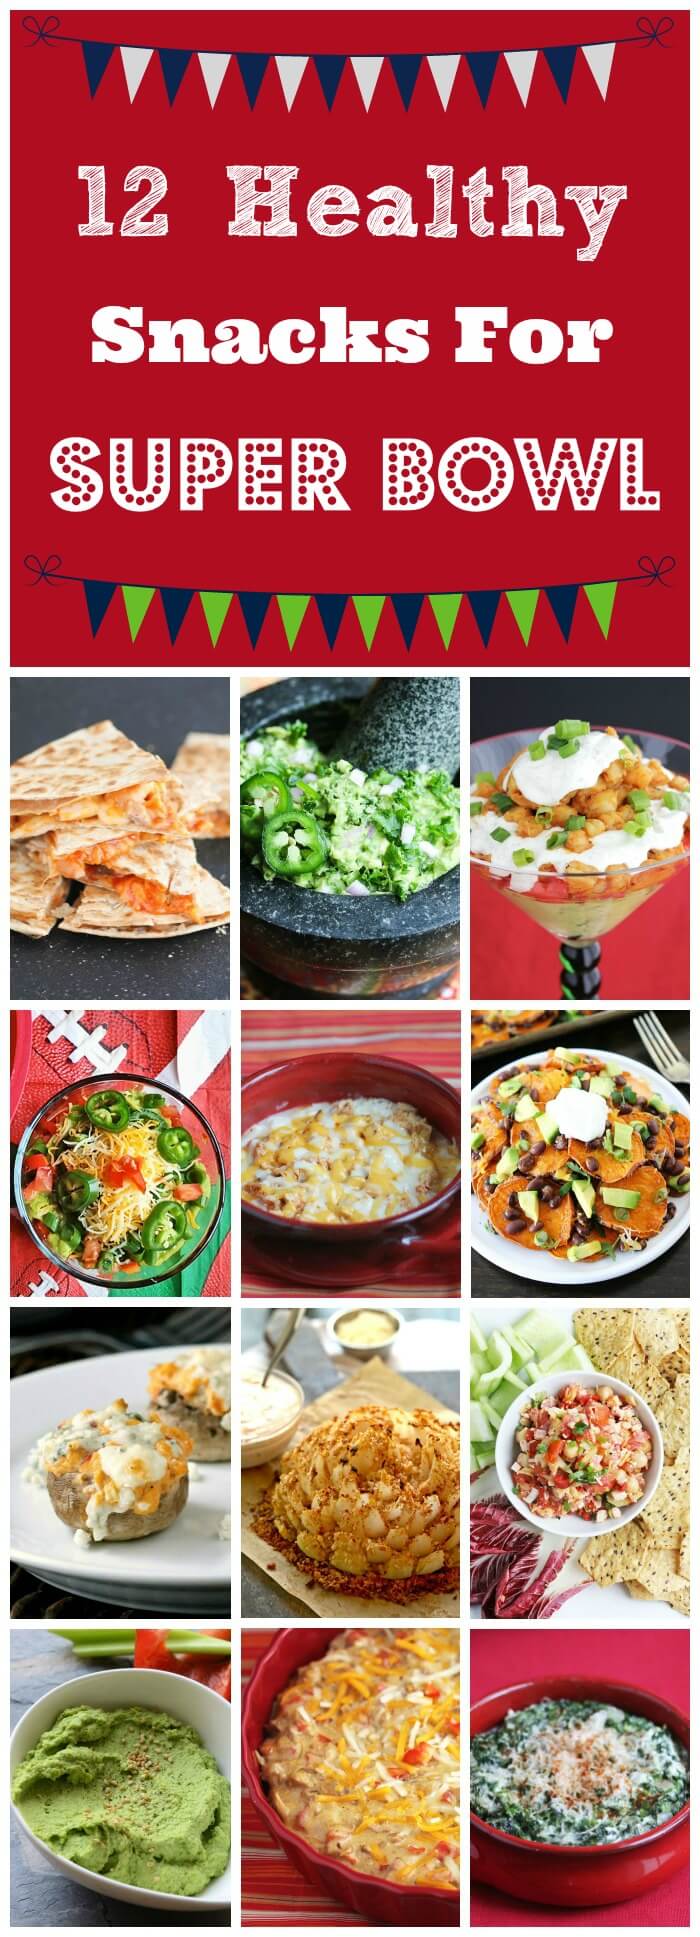 Healthy Snacks for Super Bowl - these are all Game Day favorites, lightened up so you can enjoy yourself at the party!